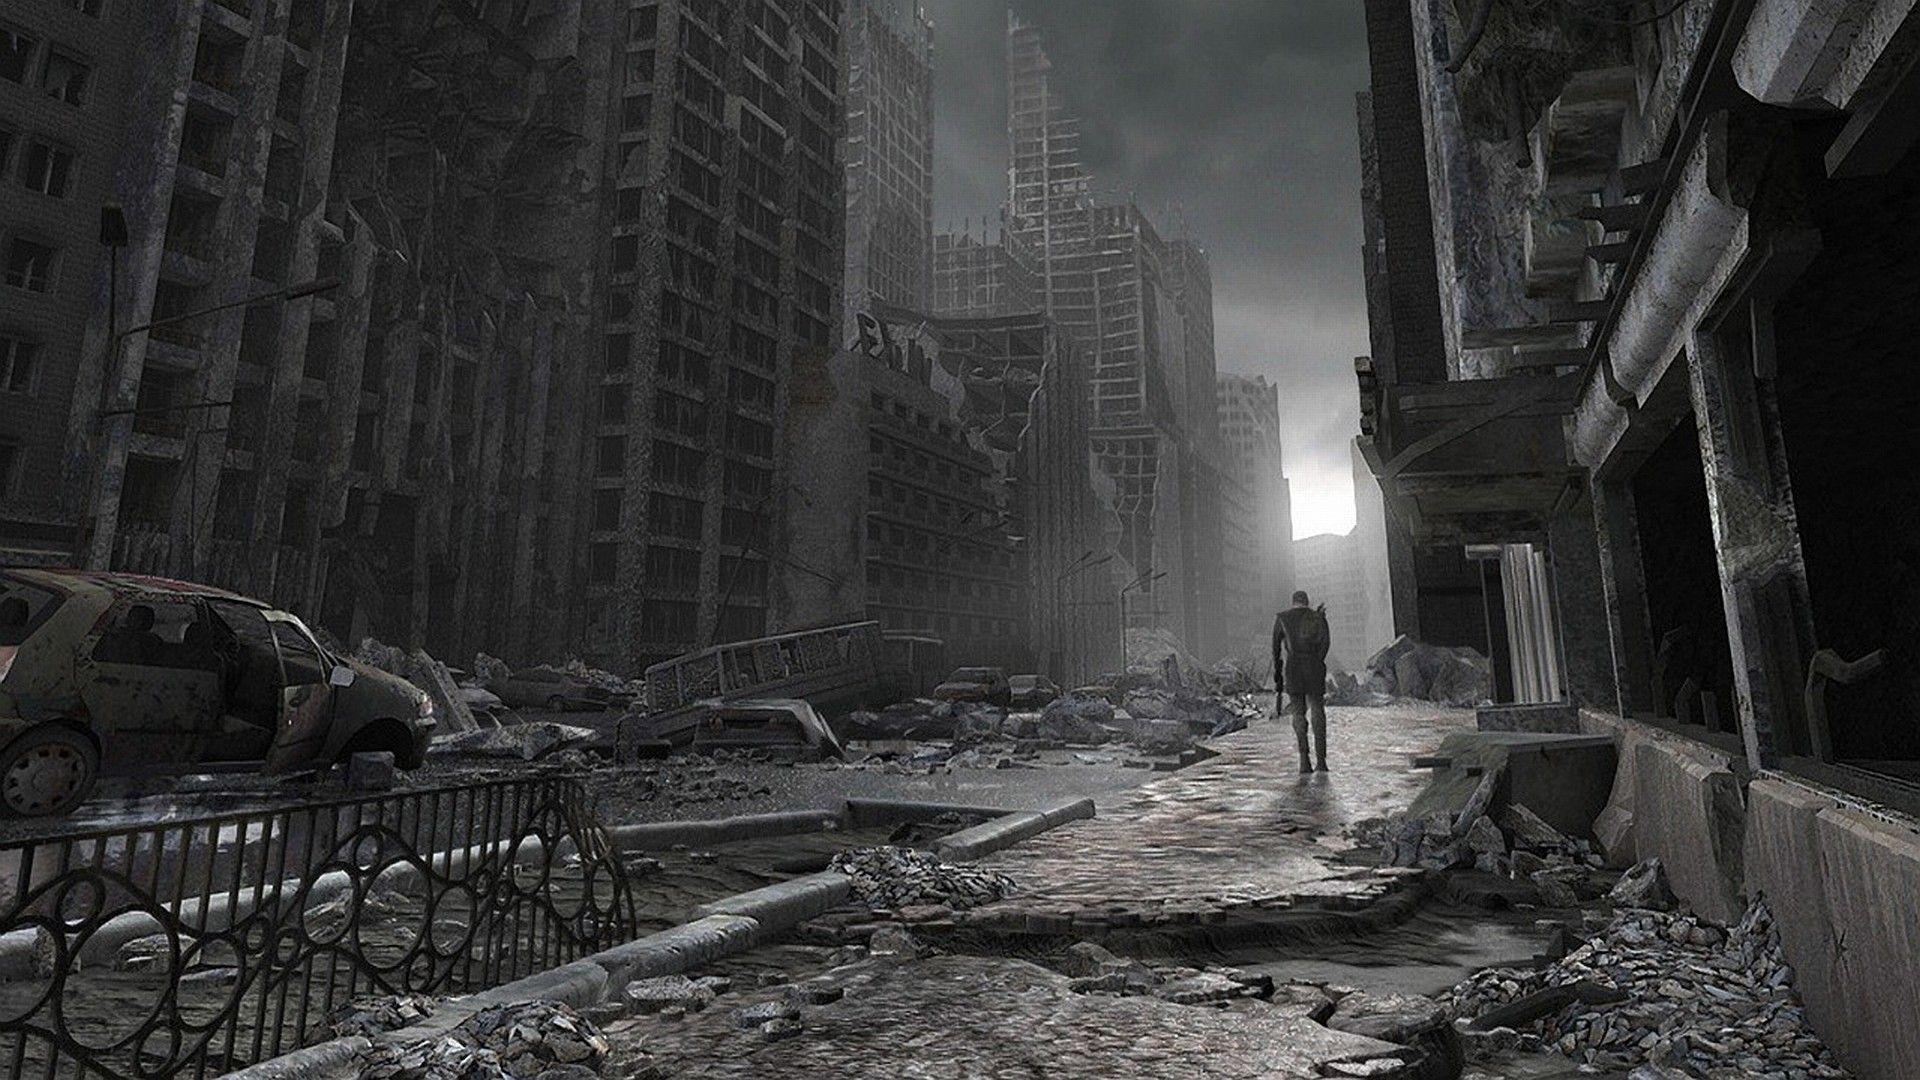 Post Apocalyptic wallpaperDownload free awesome wallpaper